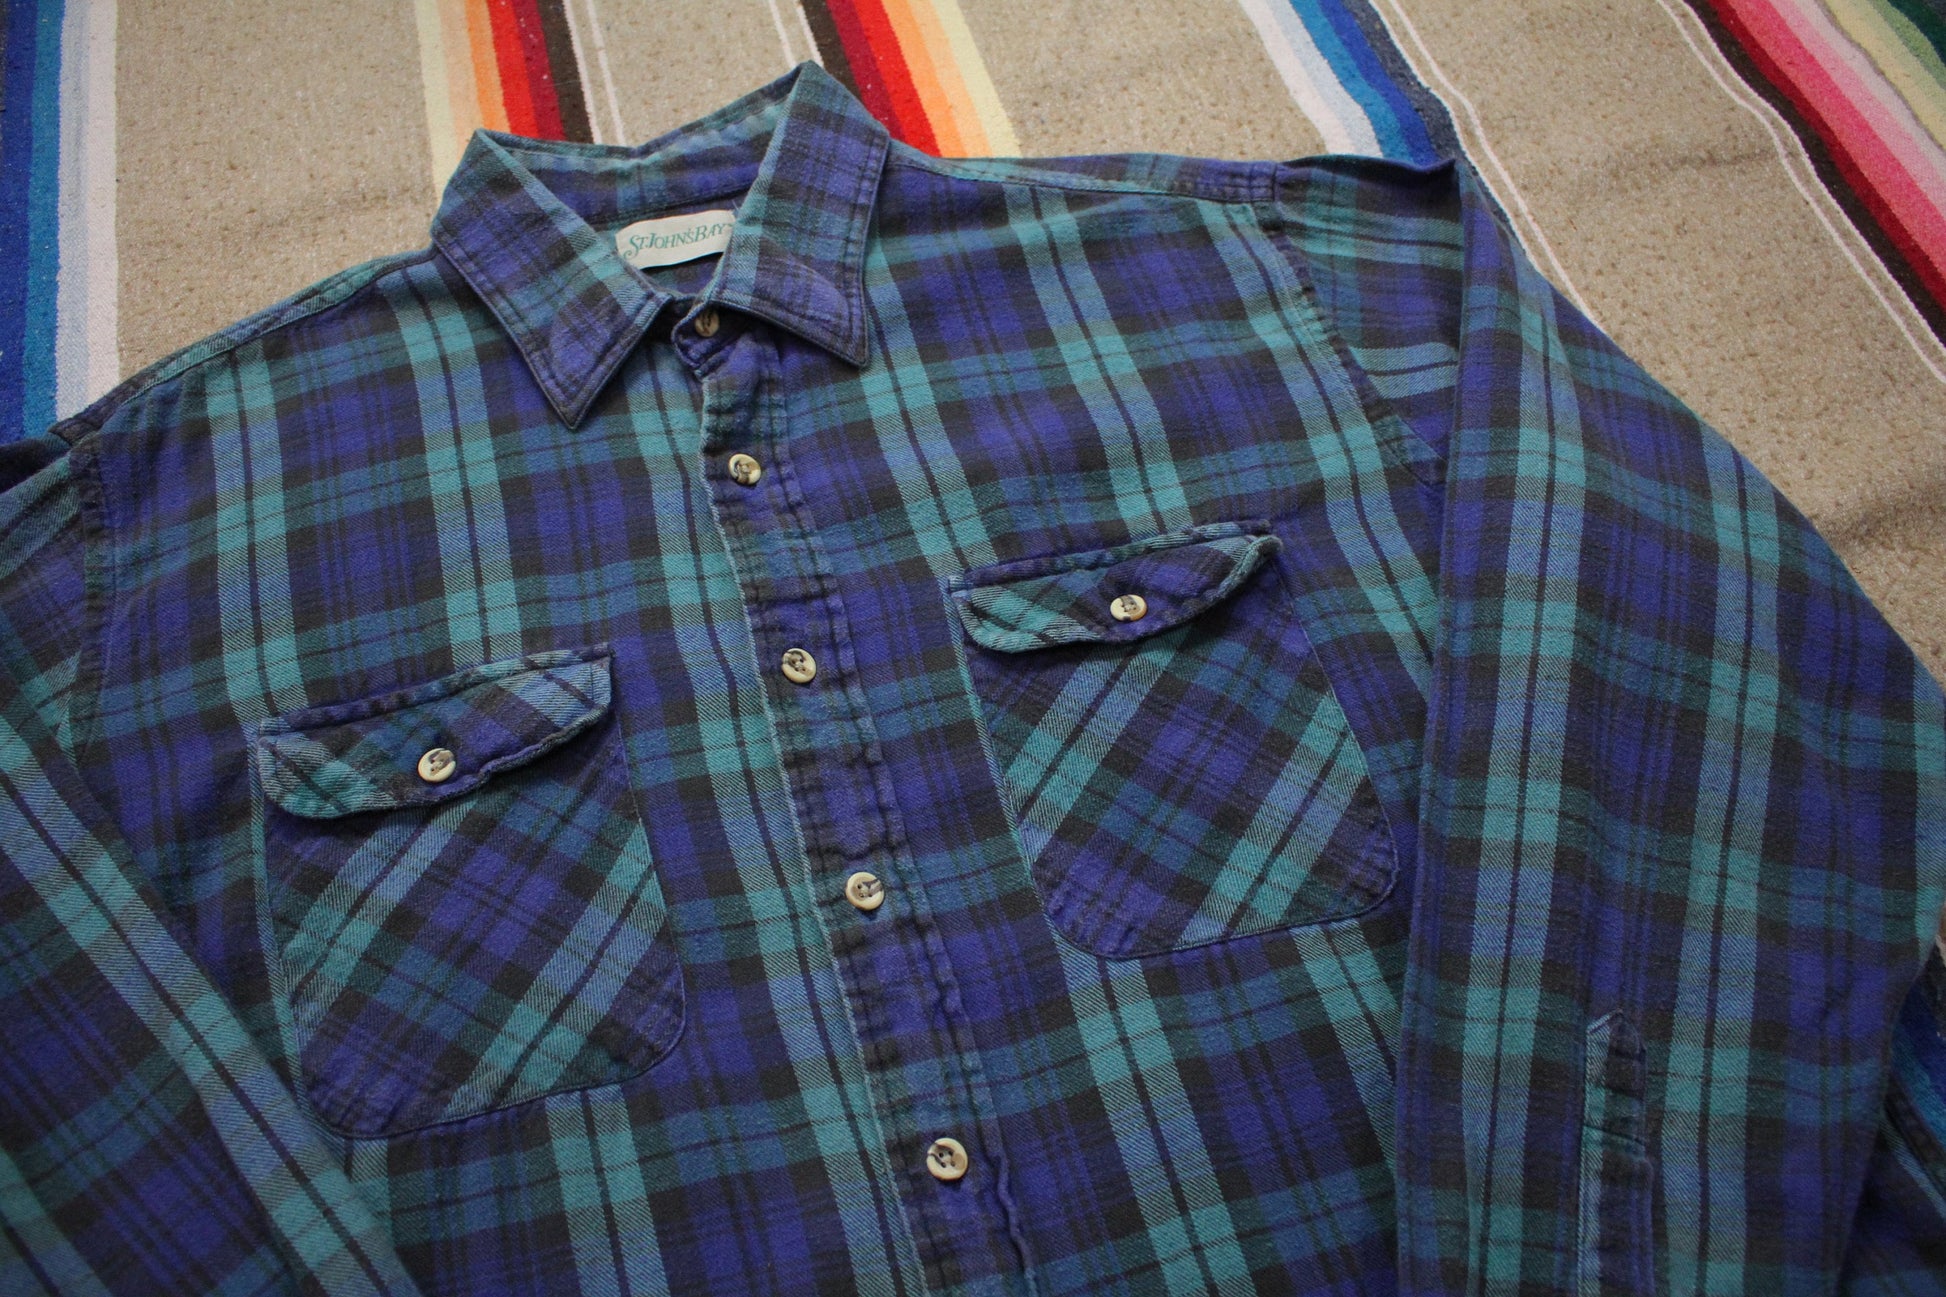 1990s/2000s St John's Bay Blue and Green Plaid Flannel Shirt Size XL